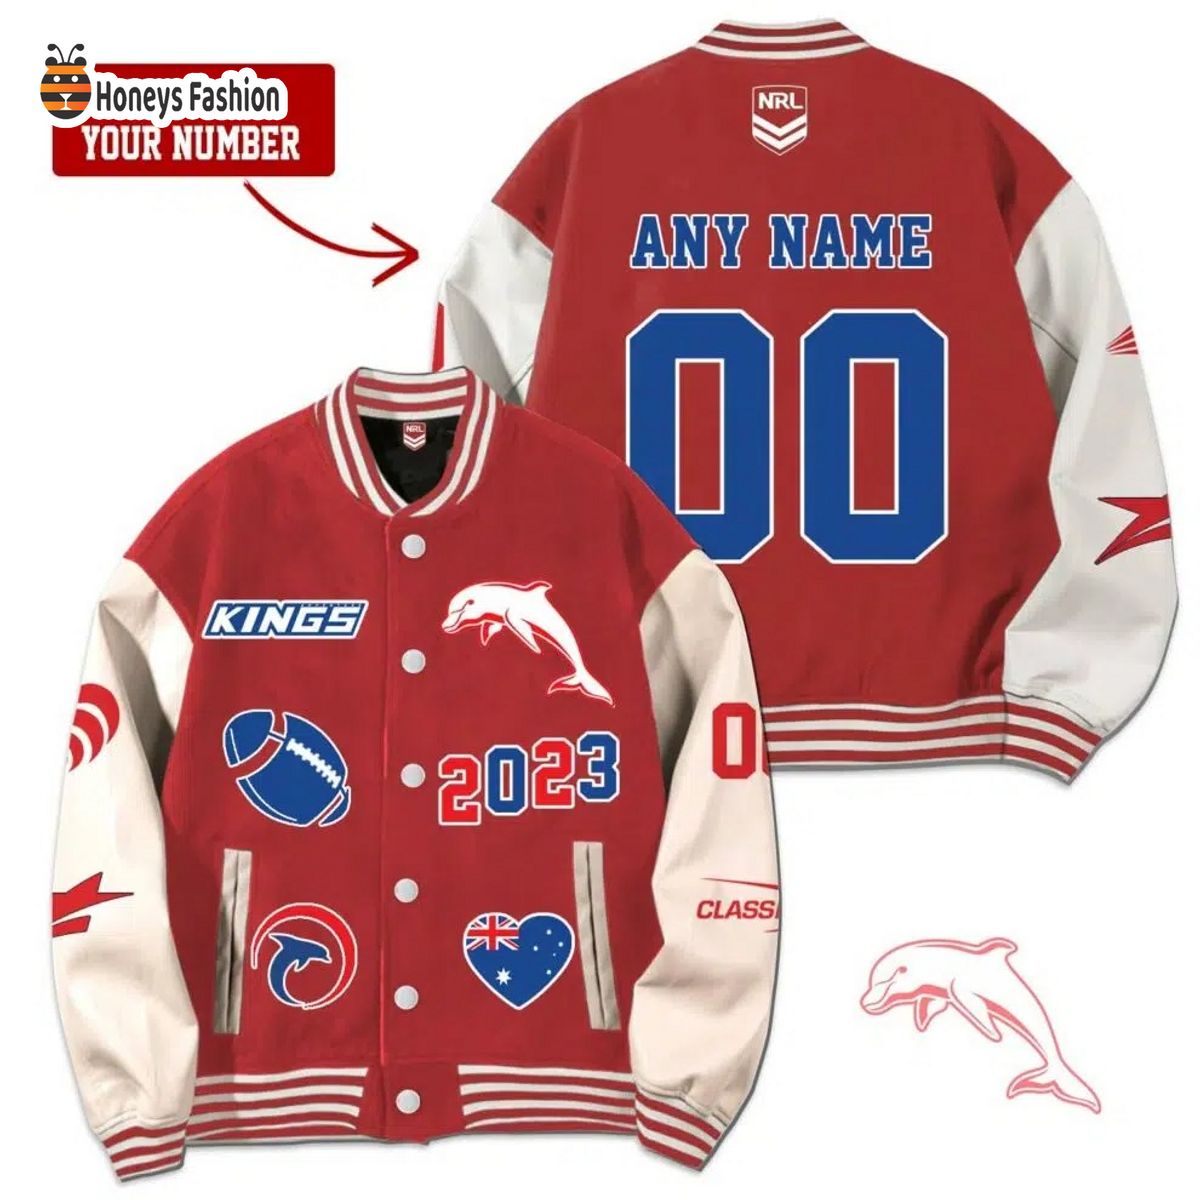 The Dolphins Rugby Personalized Jacket